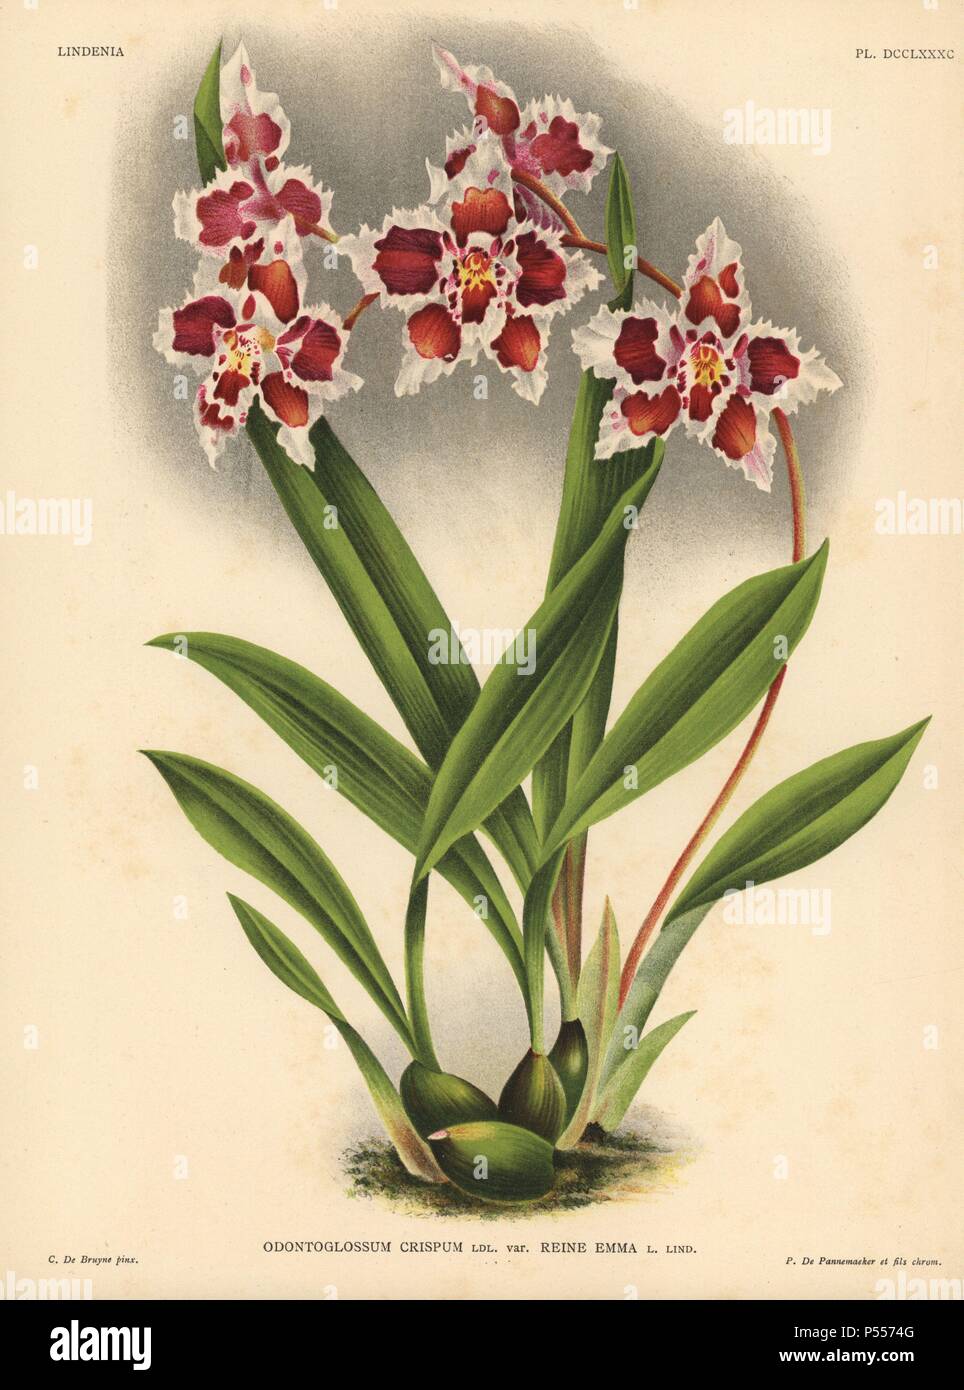 Queen Emma variety of Odontoglossum crispum orchid. Illustration drawn by C. de Bruyne and chromolithographed by P. de Pannemaeker et fils from Lucien Linden's 'Lindenia, Iconographie des Orchidees,' Brussels, 1902. Stock Photo